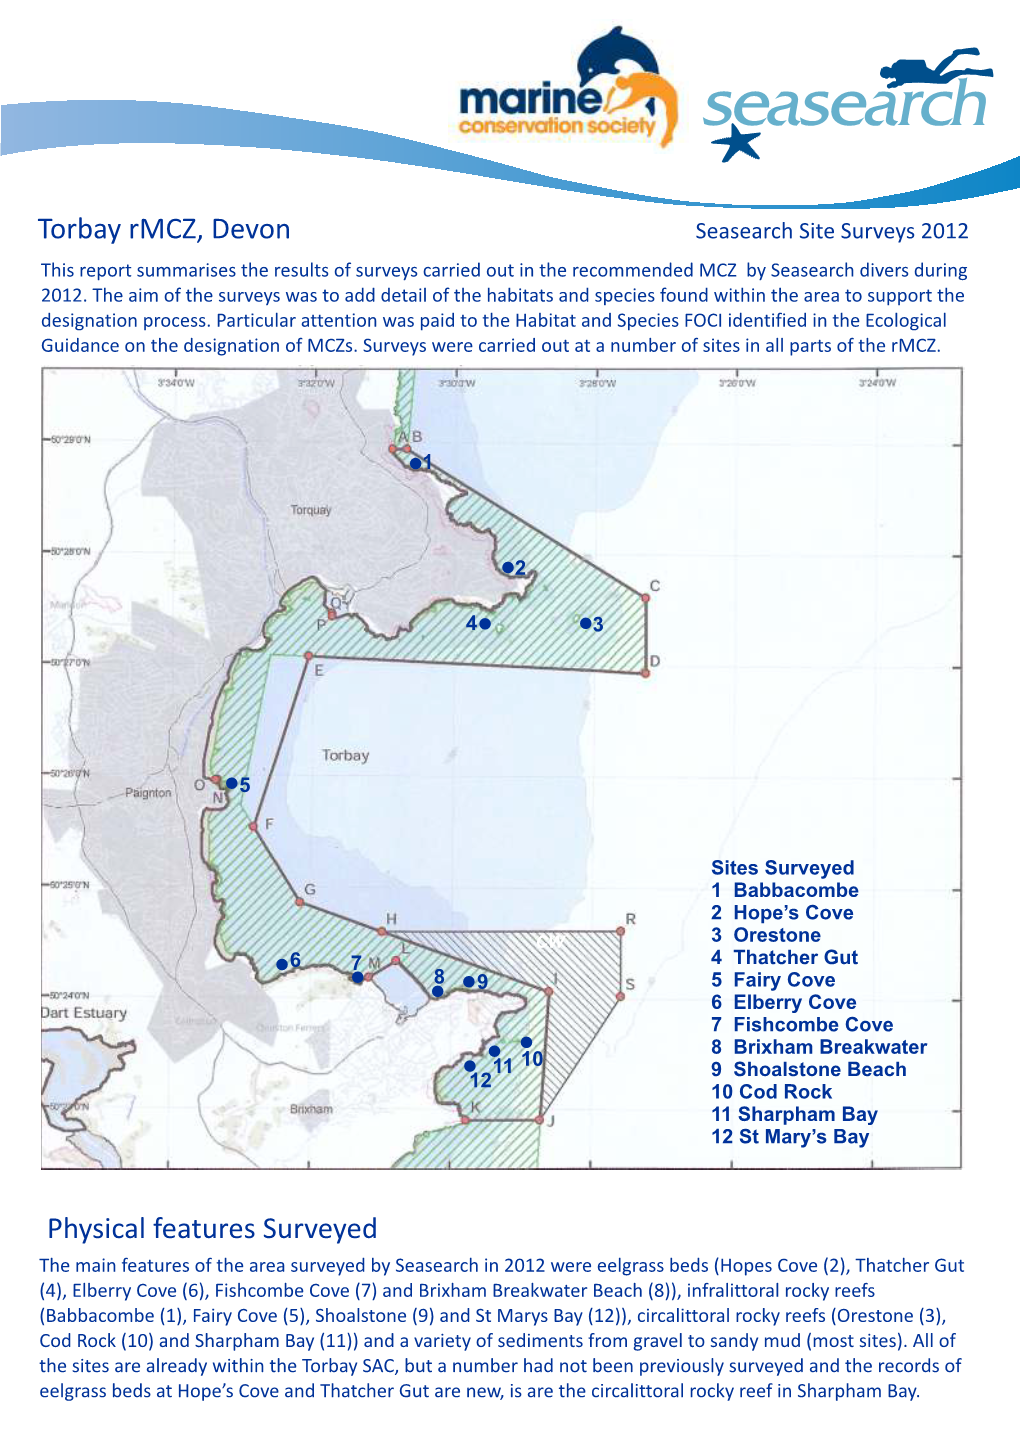 Torbay Rmcz, Devon Physical Features Surveyed